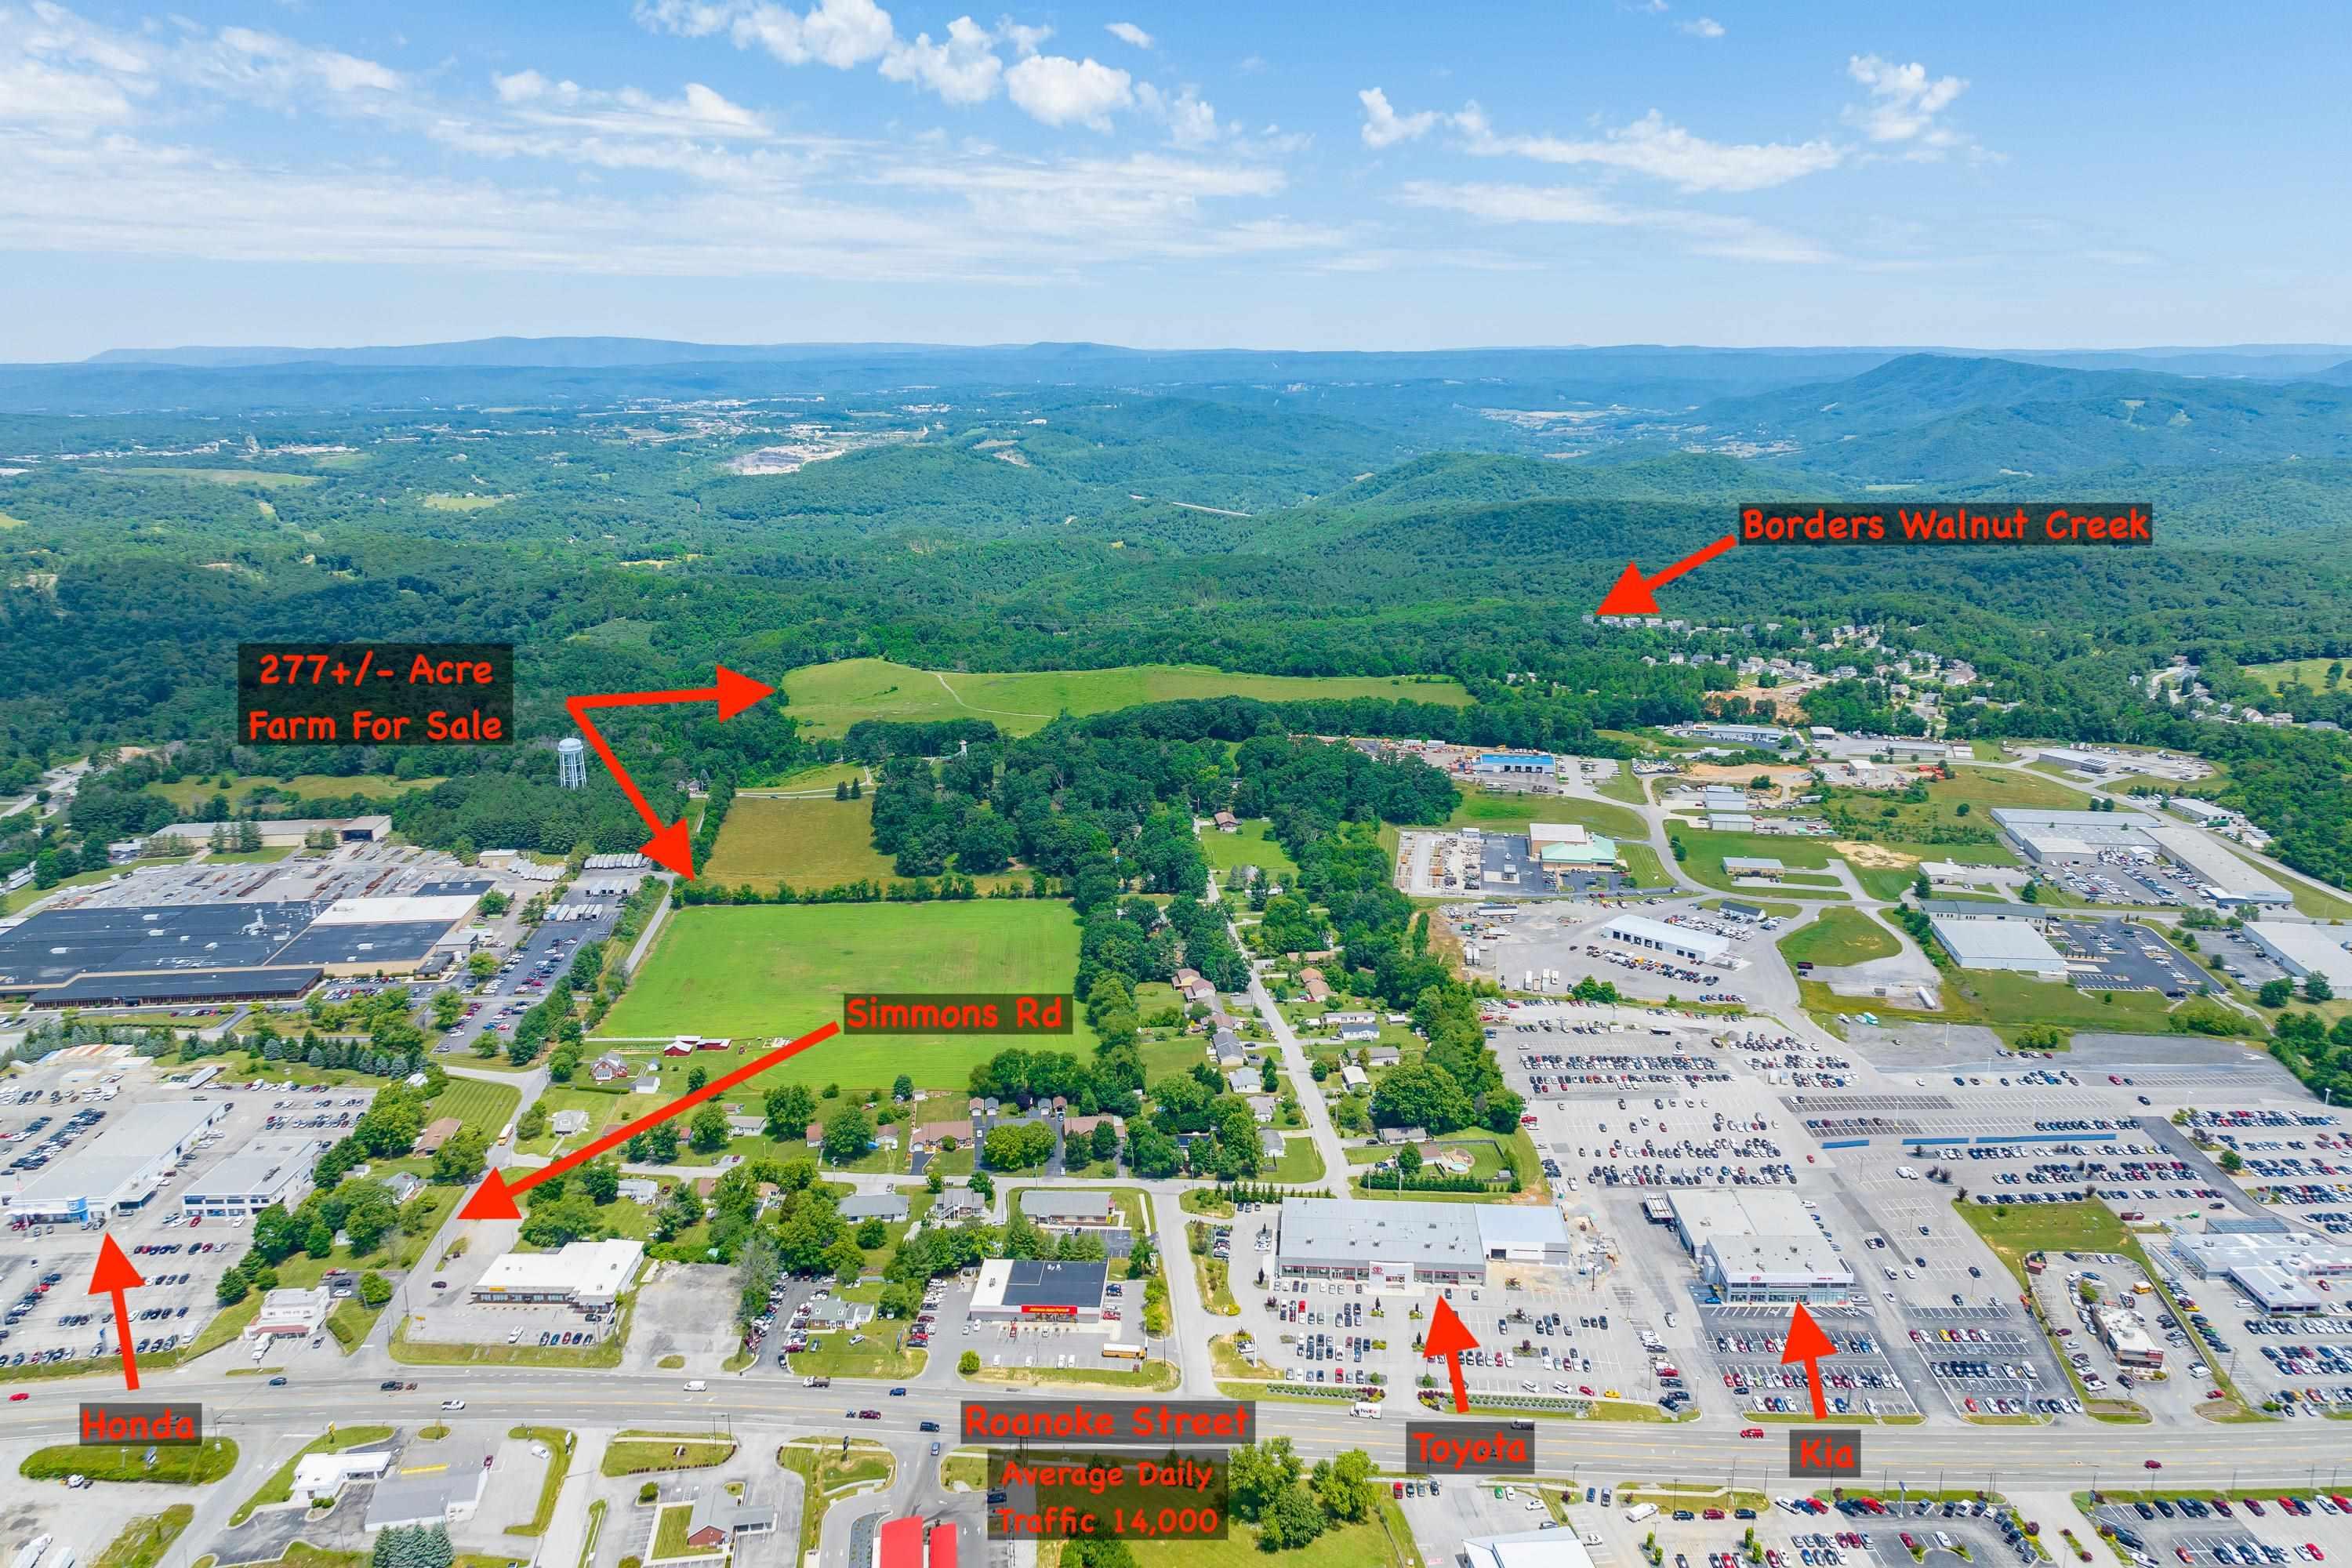 Checkout this incredible investment and potential development opportunity close to I-81 and US-460 in Christiansburg VA, and just 15 minutes from Blacksburg and Virginia Tech. This 277 acre property is being offered for the first time and is in a prime location in the hub of the New River Valley in Montgomery County. This large farm estate sits 0.1 miles off of Roanoke Street, which has an average daily traffic count of 14,000, easily connects to highway US-460 (40,000 Average Daily Traffic) and I-81, and has a wide variety of established businesses, employers, and schools nearby. There are a wide variety of development opportunities here with long range views, easy access to amenities and highway/interstates, and one portion of the property even borders an increasingly established residential housing development. The Montgomery County Planning department has also included some of this property in their “Urban Expansion Area” (see docs) Zoned A1. Buyer/buyers agents to confirm details.